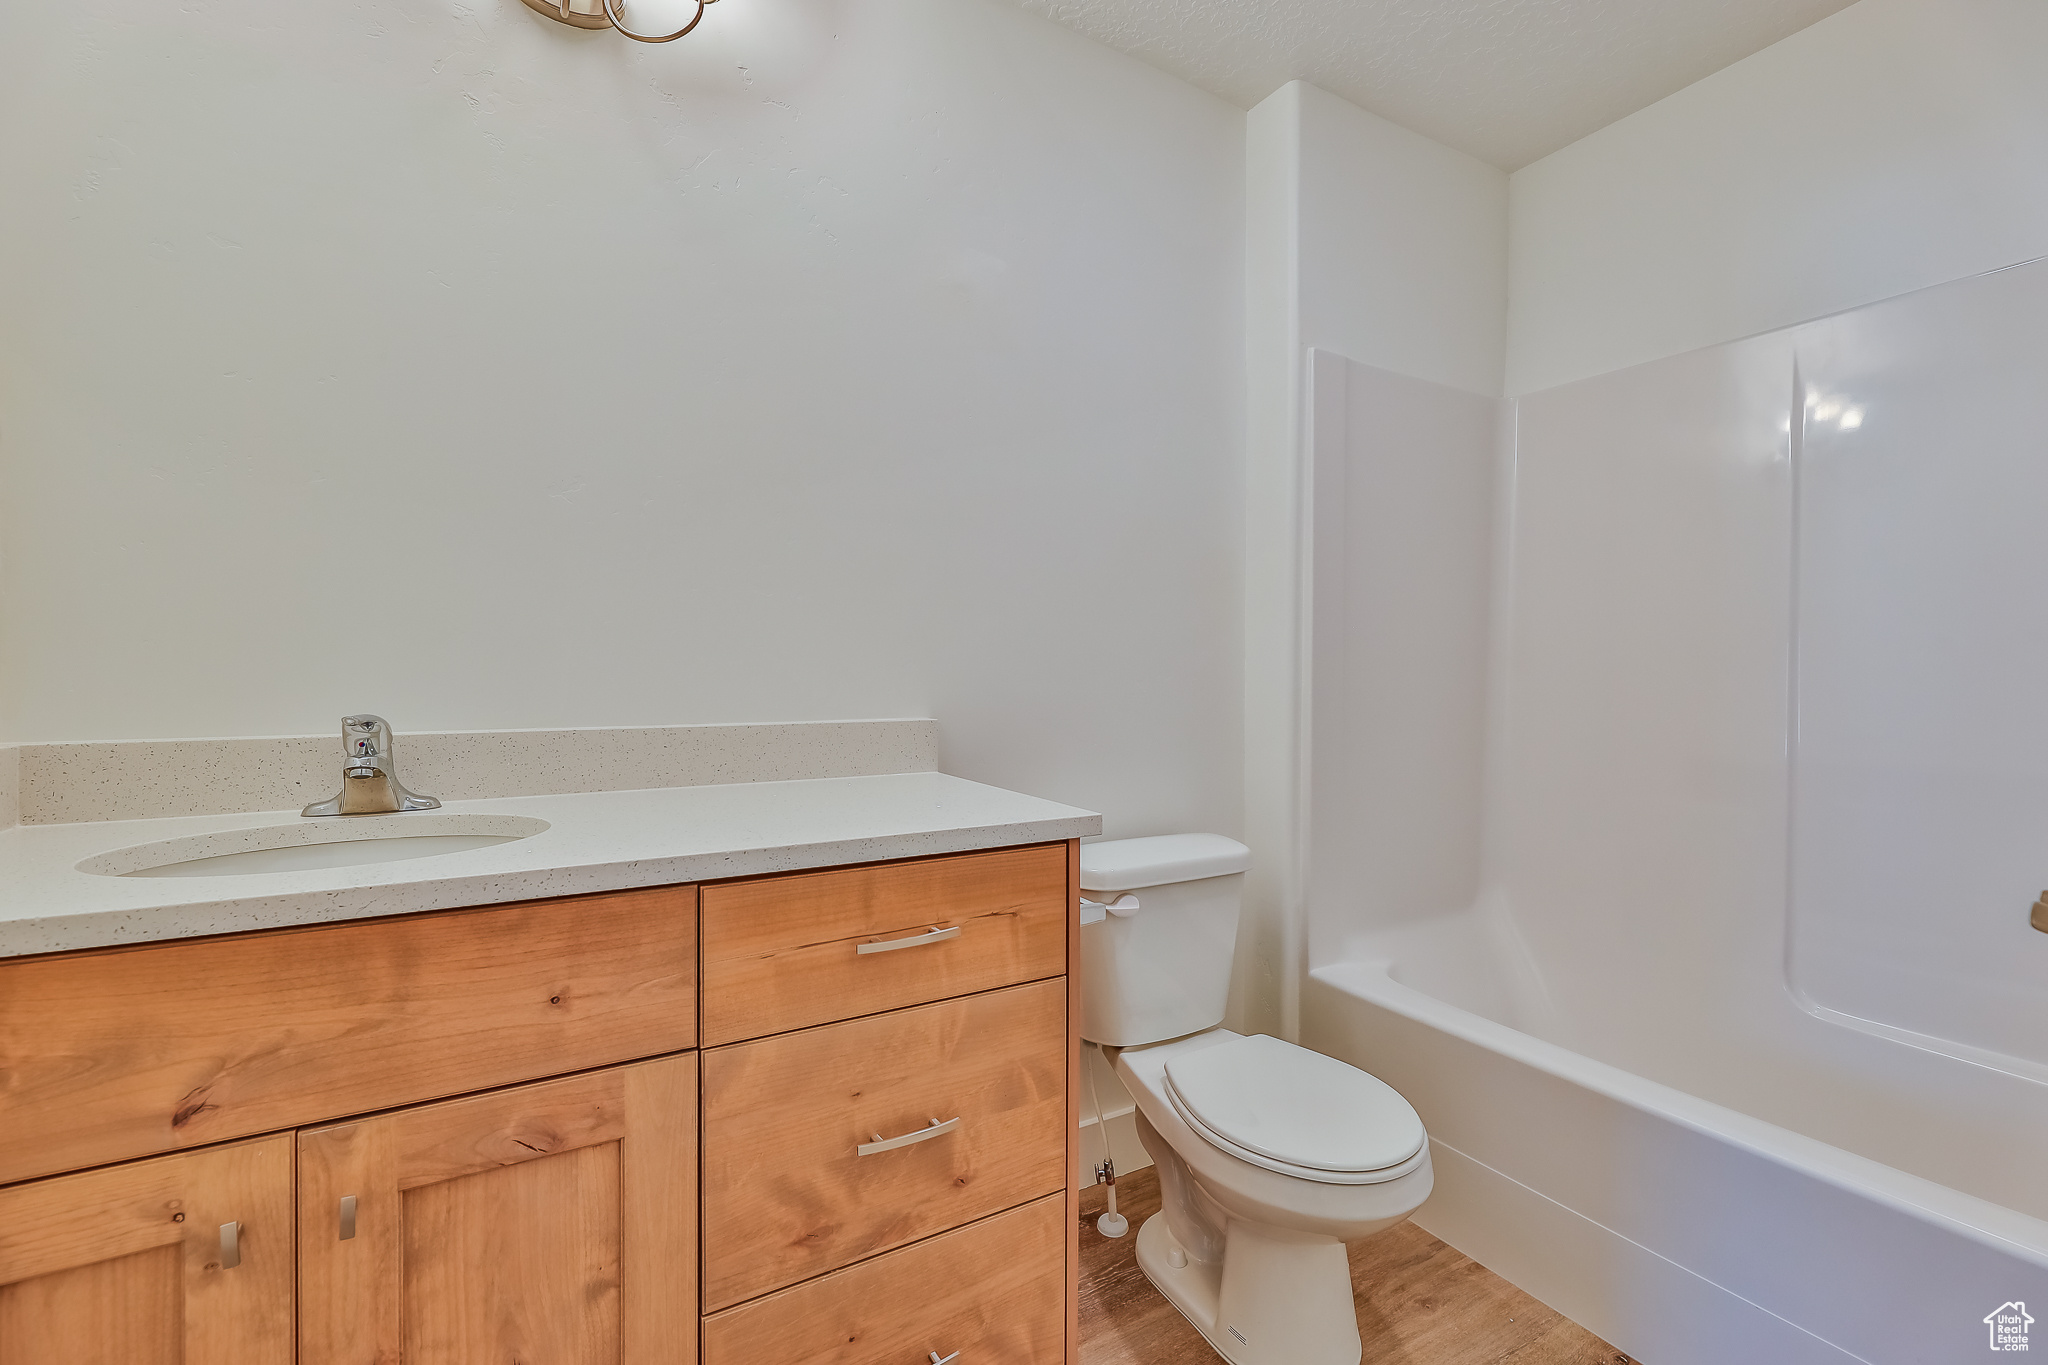 Full bathroom with vanity, toilet, bathing tub / shower combination, and wood-type flooring